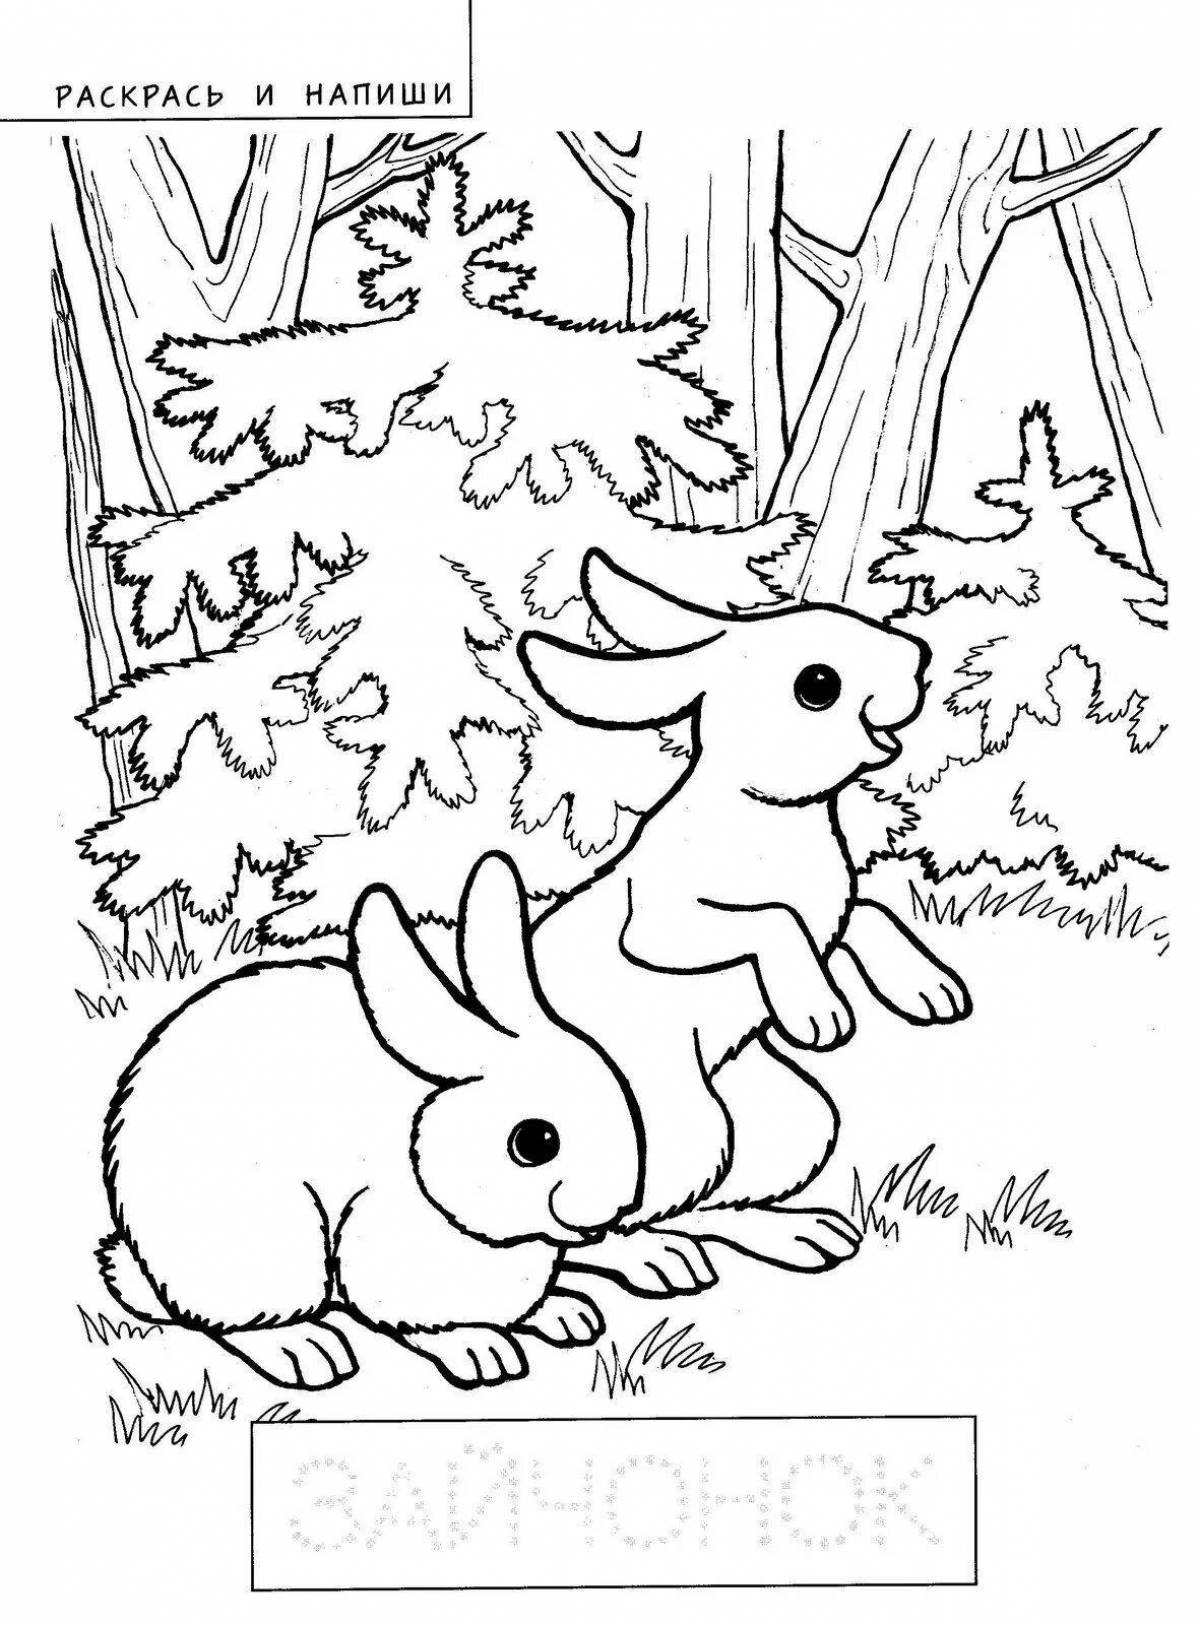 Rampant hare and tree coloring page